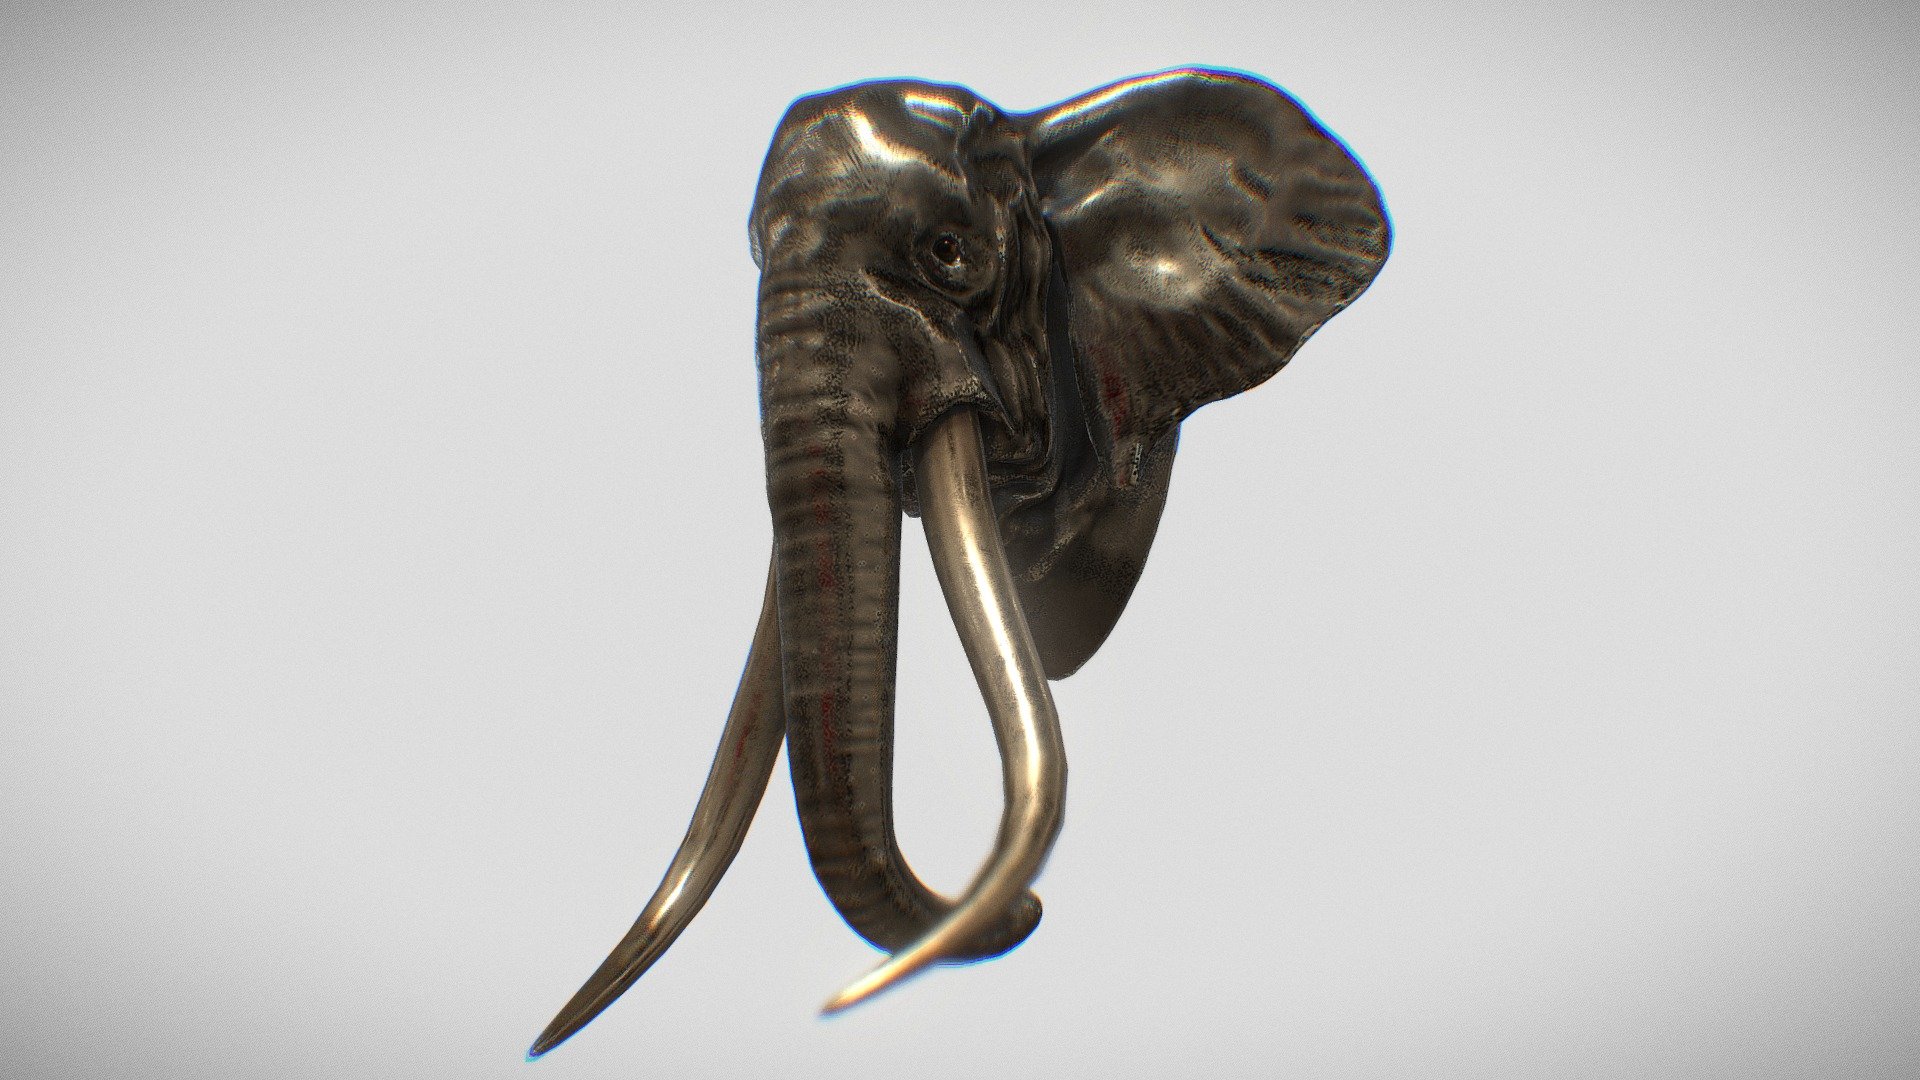 I made this model during sculpt january 2022.

This is a roughly version of a model sculpted in nomad and zbrush.

see more of my work on my website and instagram:

https://www.tomjohnsonart.co.uk/

https://www.instagram.com/tomjohnsonart/ - OLD TRUNK ELEPHANT texture test - 3D model by Tom Johnson (@Brigyon) 3d model